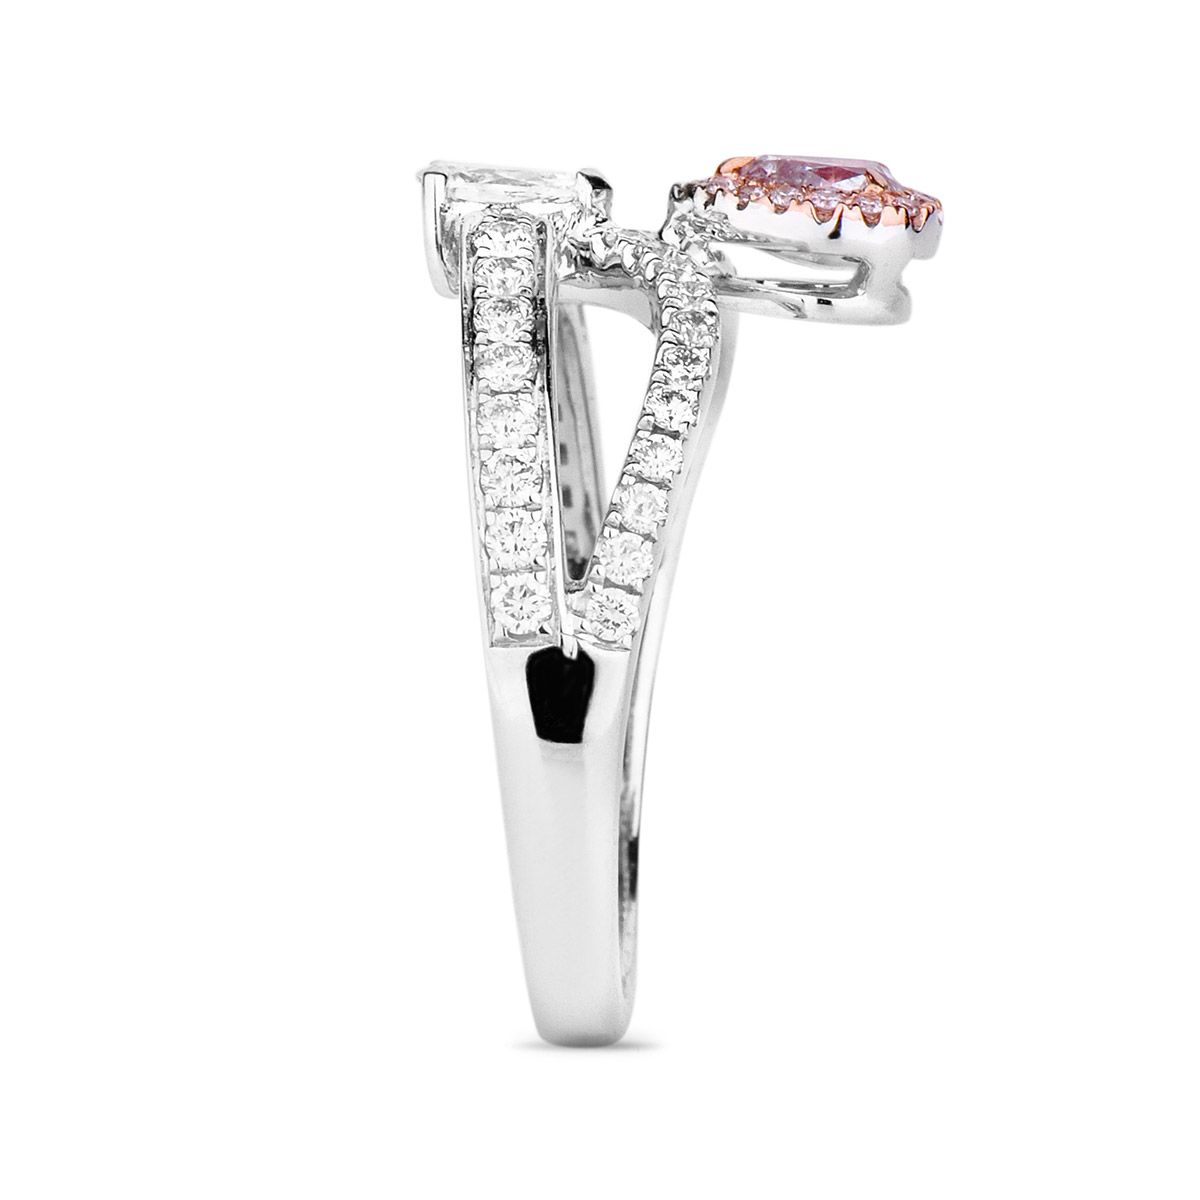 Fancy Brownish Pink Diamond Ring, 0.21 Ct. (0.78 Ct. TW), Pear shape, GIA Certified, 5182226880